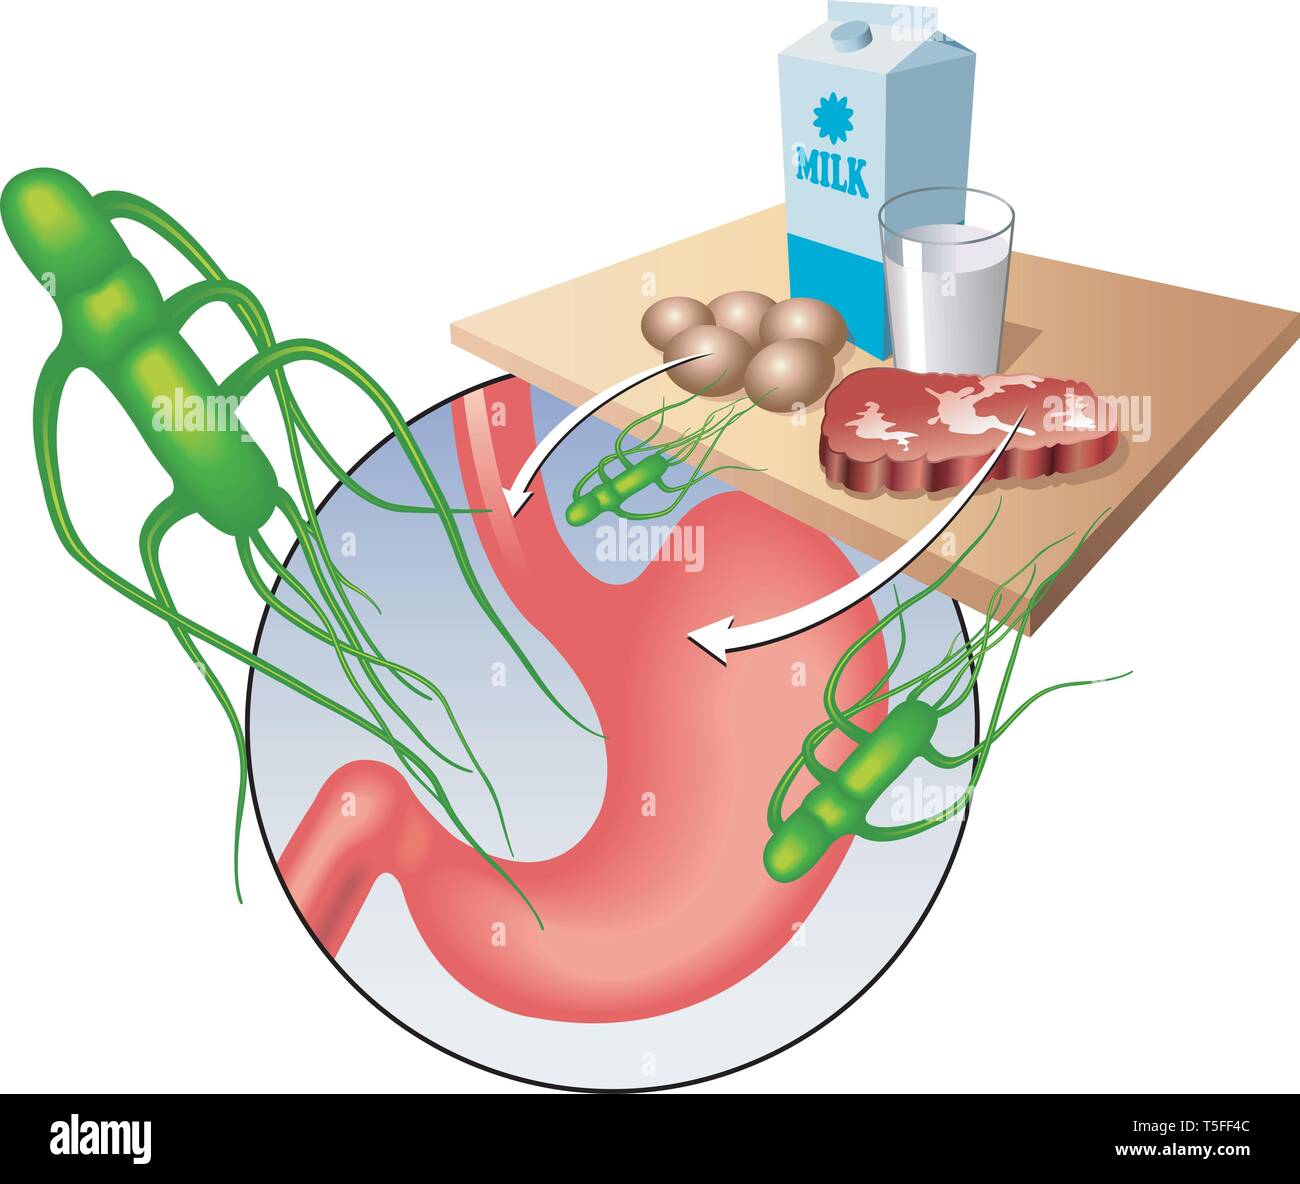 Medical illustration showing the salmonella virus and the main contaminated foods. Stock Vector